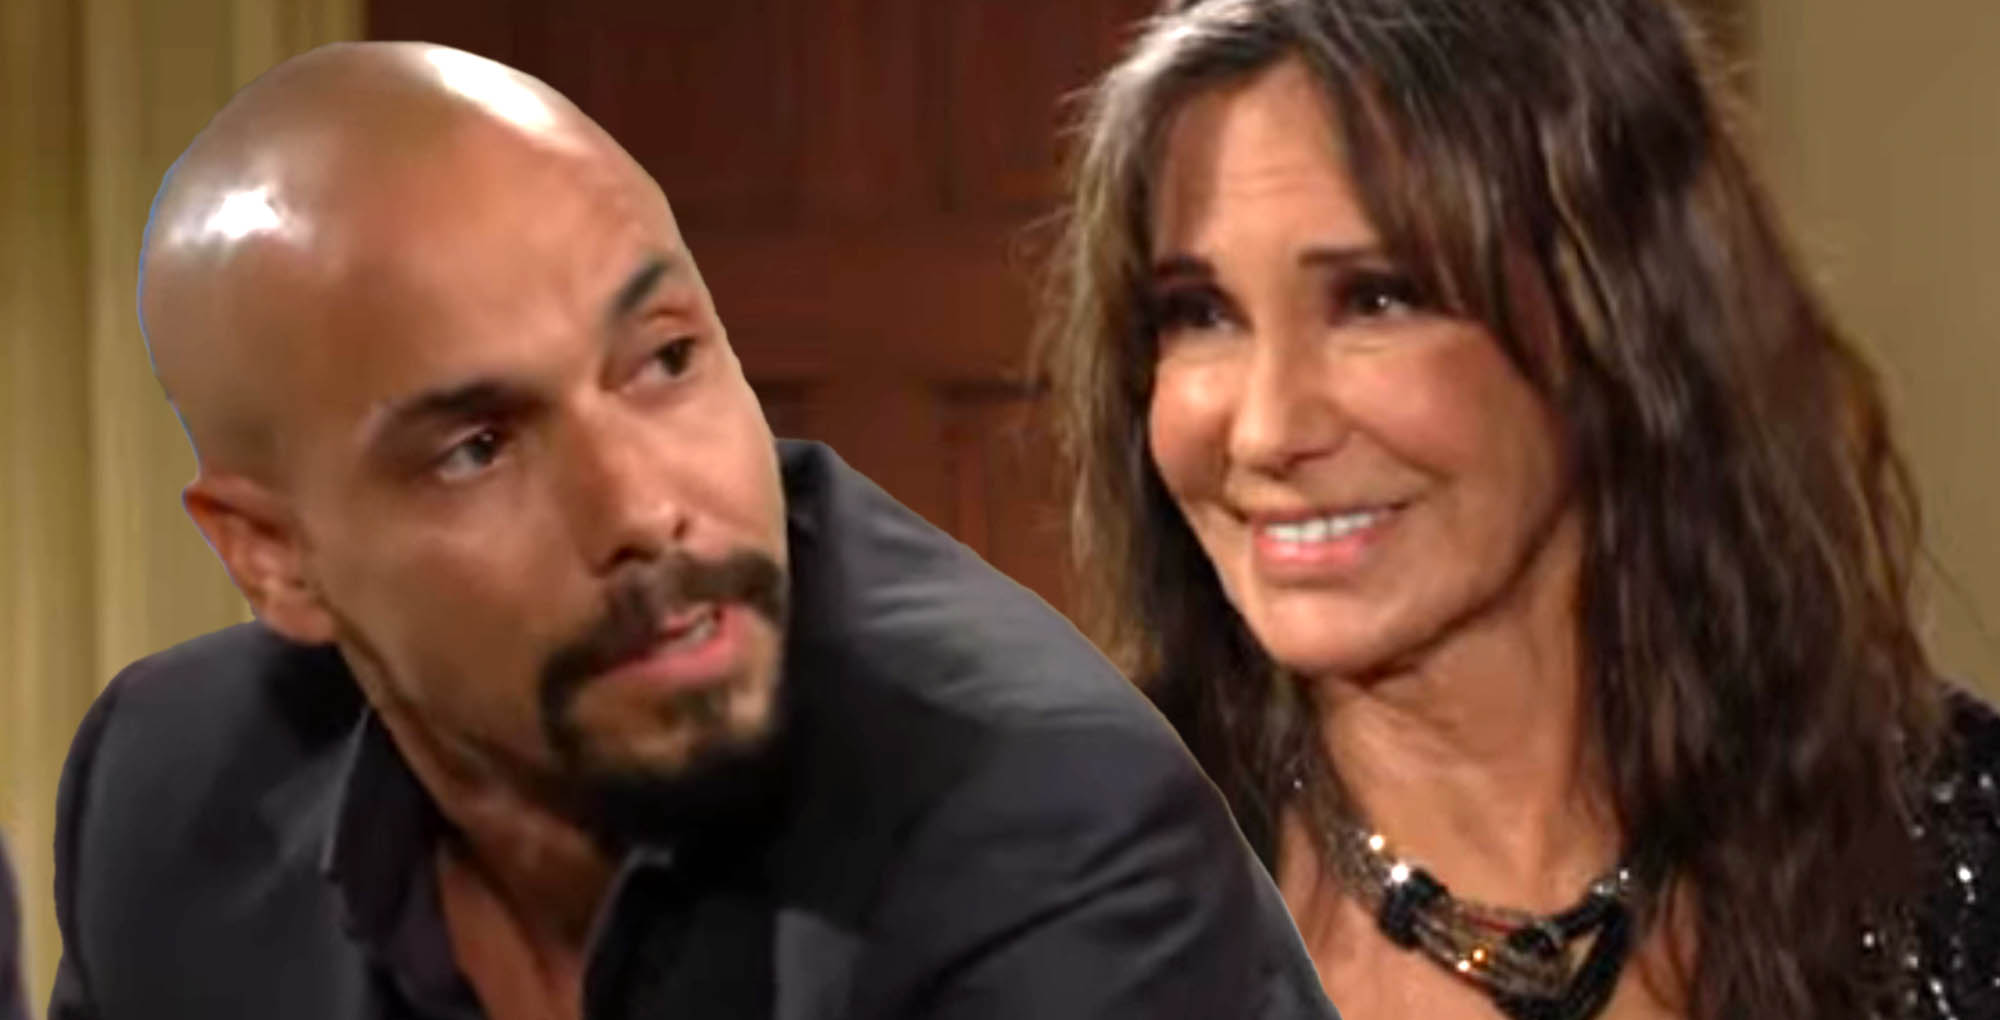 jill is fine with devon on young and the restless.